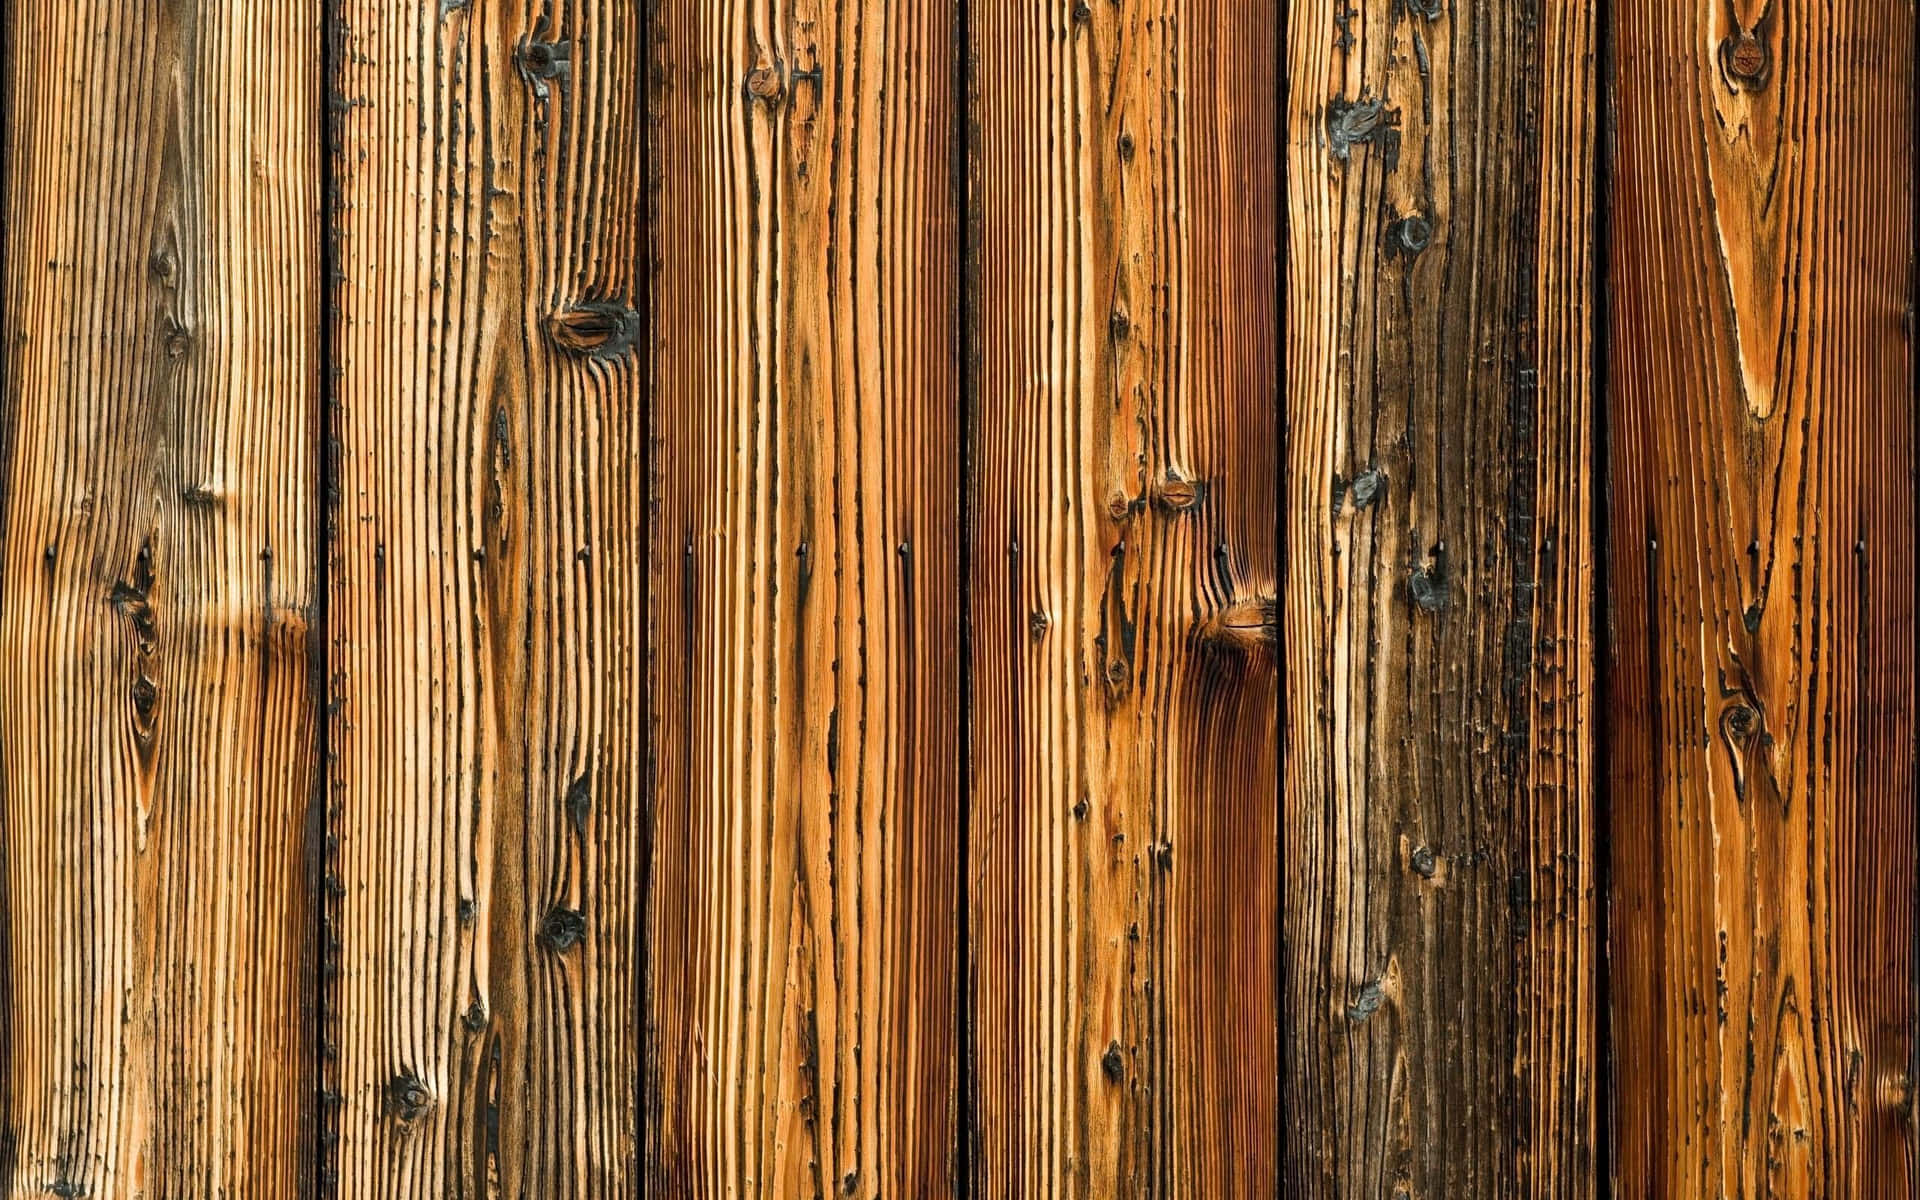 Rough And Chipped Wooden Background